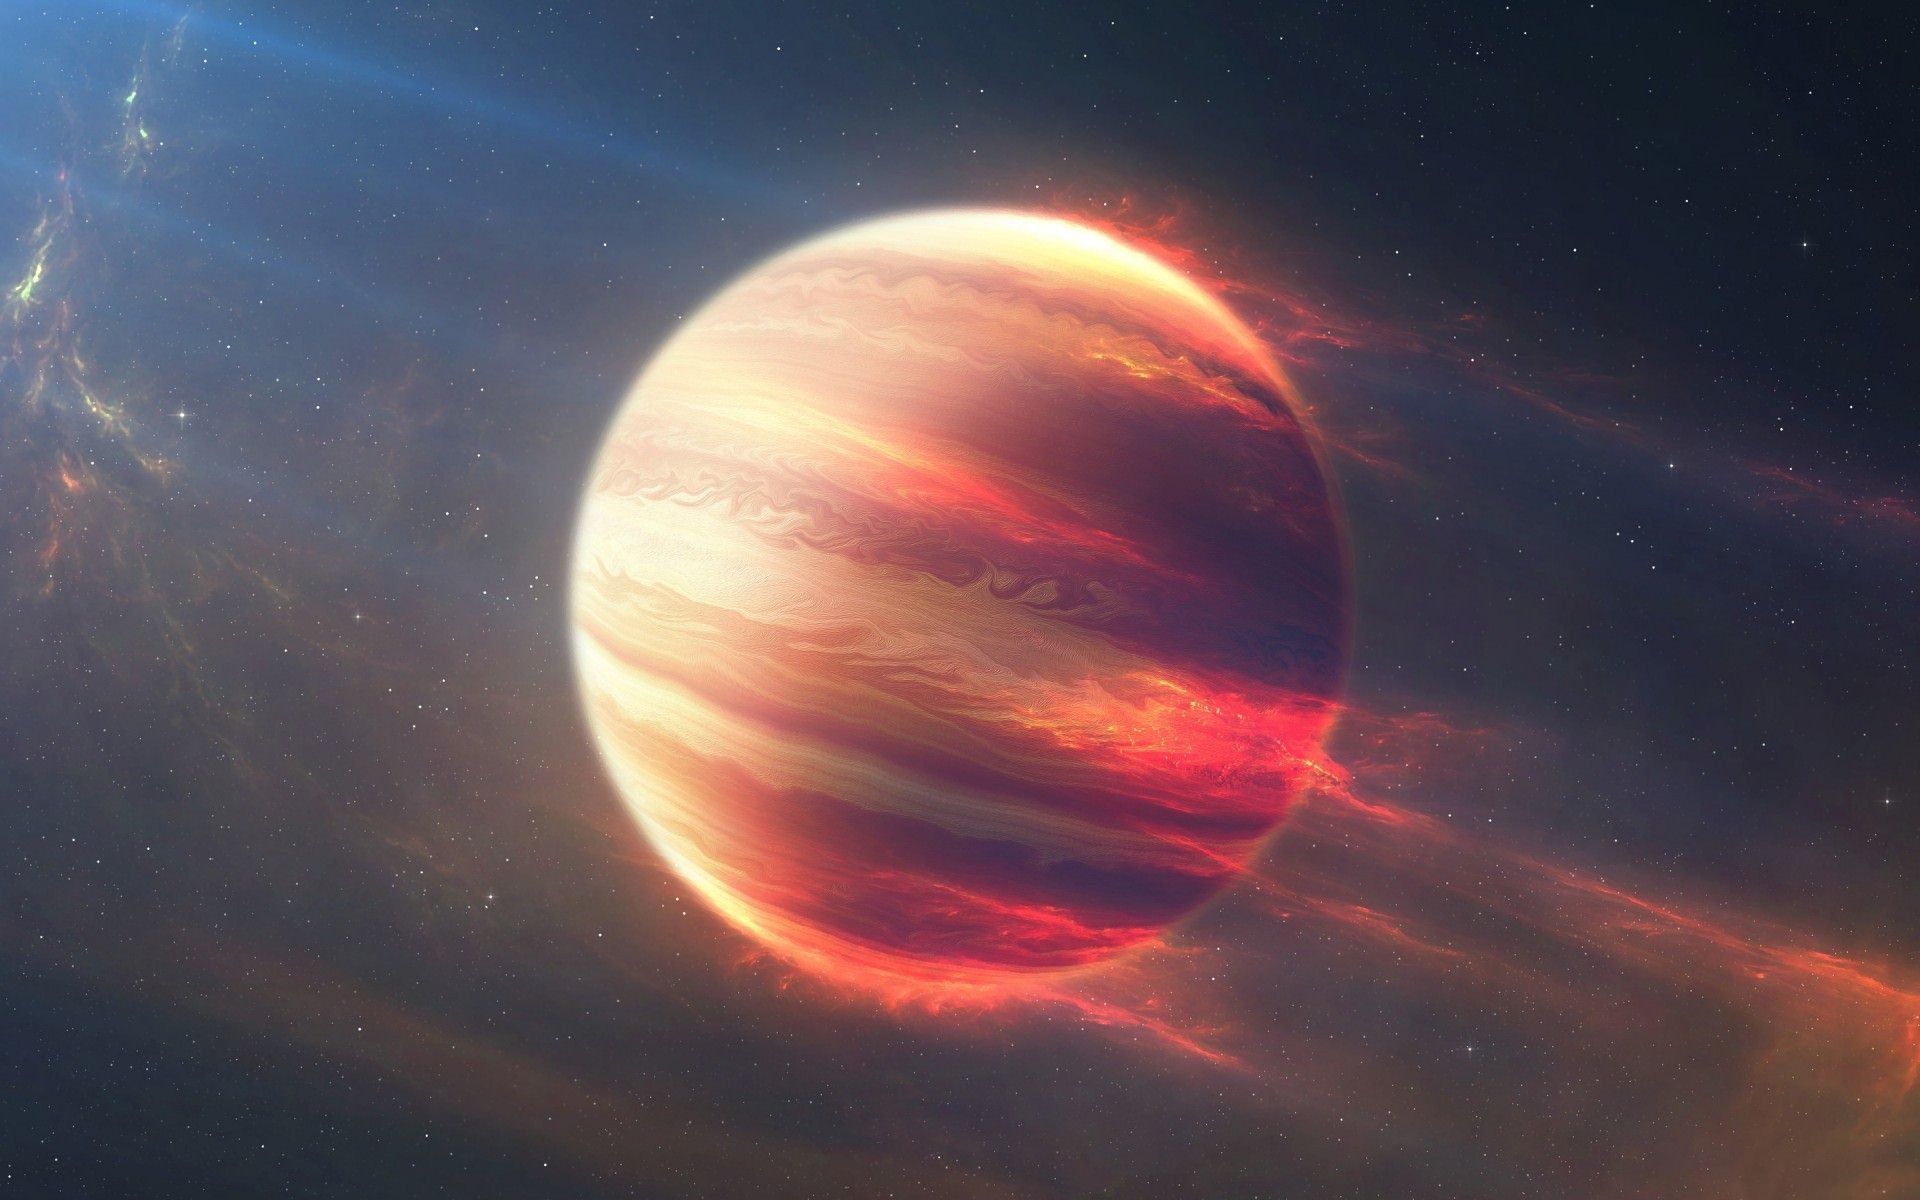 An artist's impression of the exoplanet 51 Pegasi b, which is the first exoplanet to be discovered. - Mars